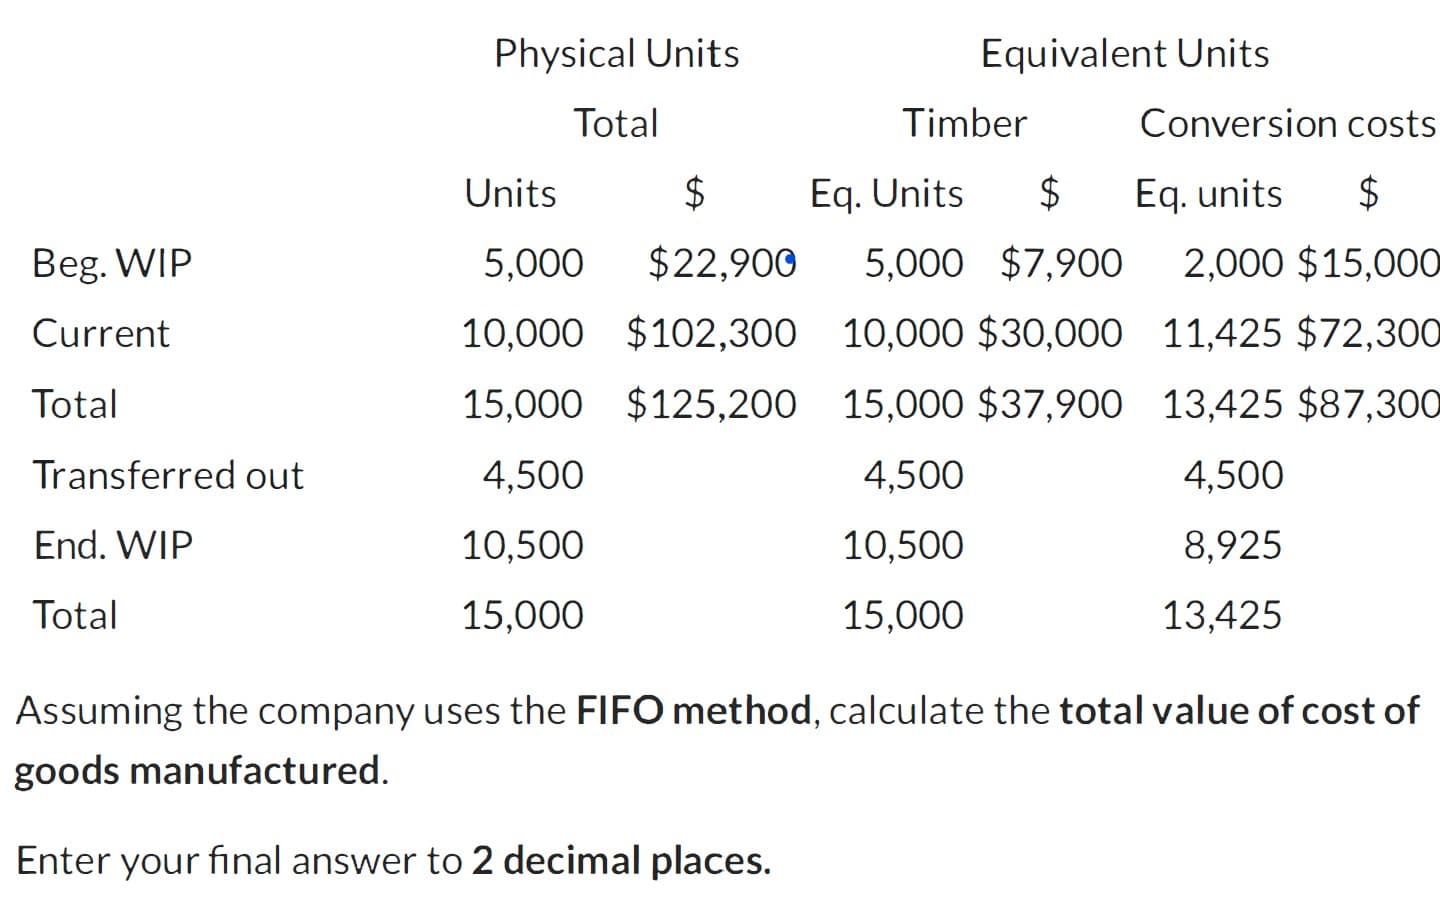 Physical Units
Equivalent Units
Total
Timber
Conversion cost:
Units
$
Eq. Units
$
Eq. units
$
Beg. WIP
5,000
$22,900
5,000 $7,900
2,000 $15,00
Current
10,000 $102,300 10,000 $30,000 11,425 $72,30
Total
15,000 $125,200 15,000 $37,900 13,425 $87,30
ransferred out
4,500
4,500
4,500
End. WIP
10,500
10,500
8,925
Total
15,000
15,000
13,425
Assuming the company uses the FIFO method, calculate the total value of cost of
goods manufactured.
Enter your final answer to 2 decimal places.
